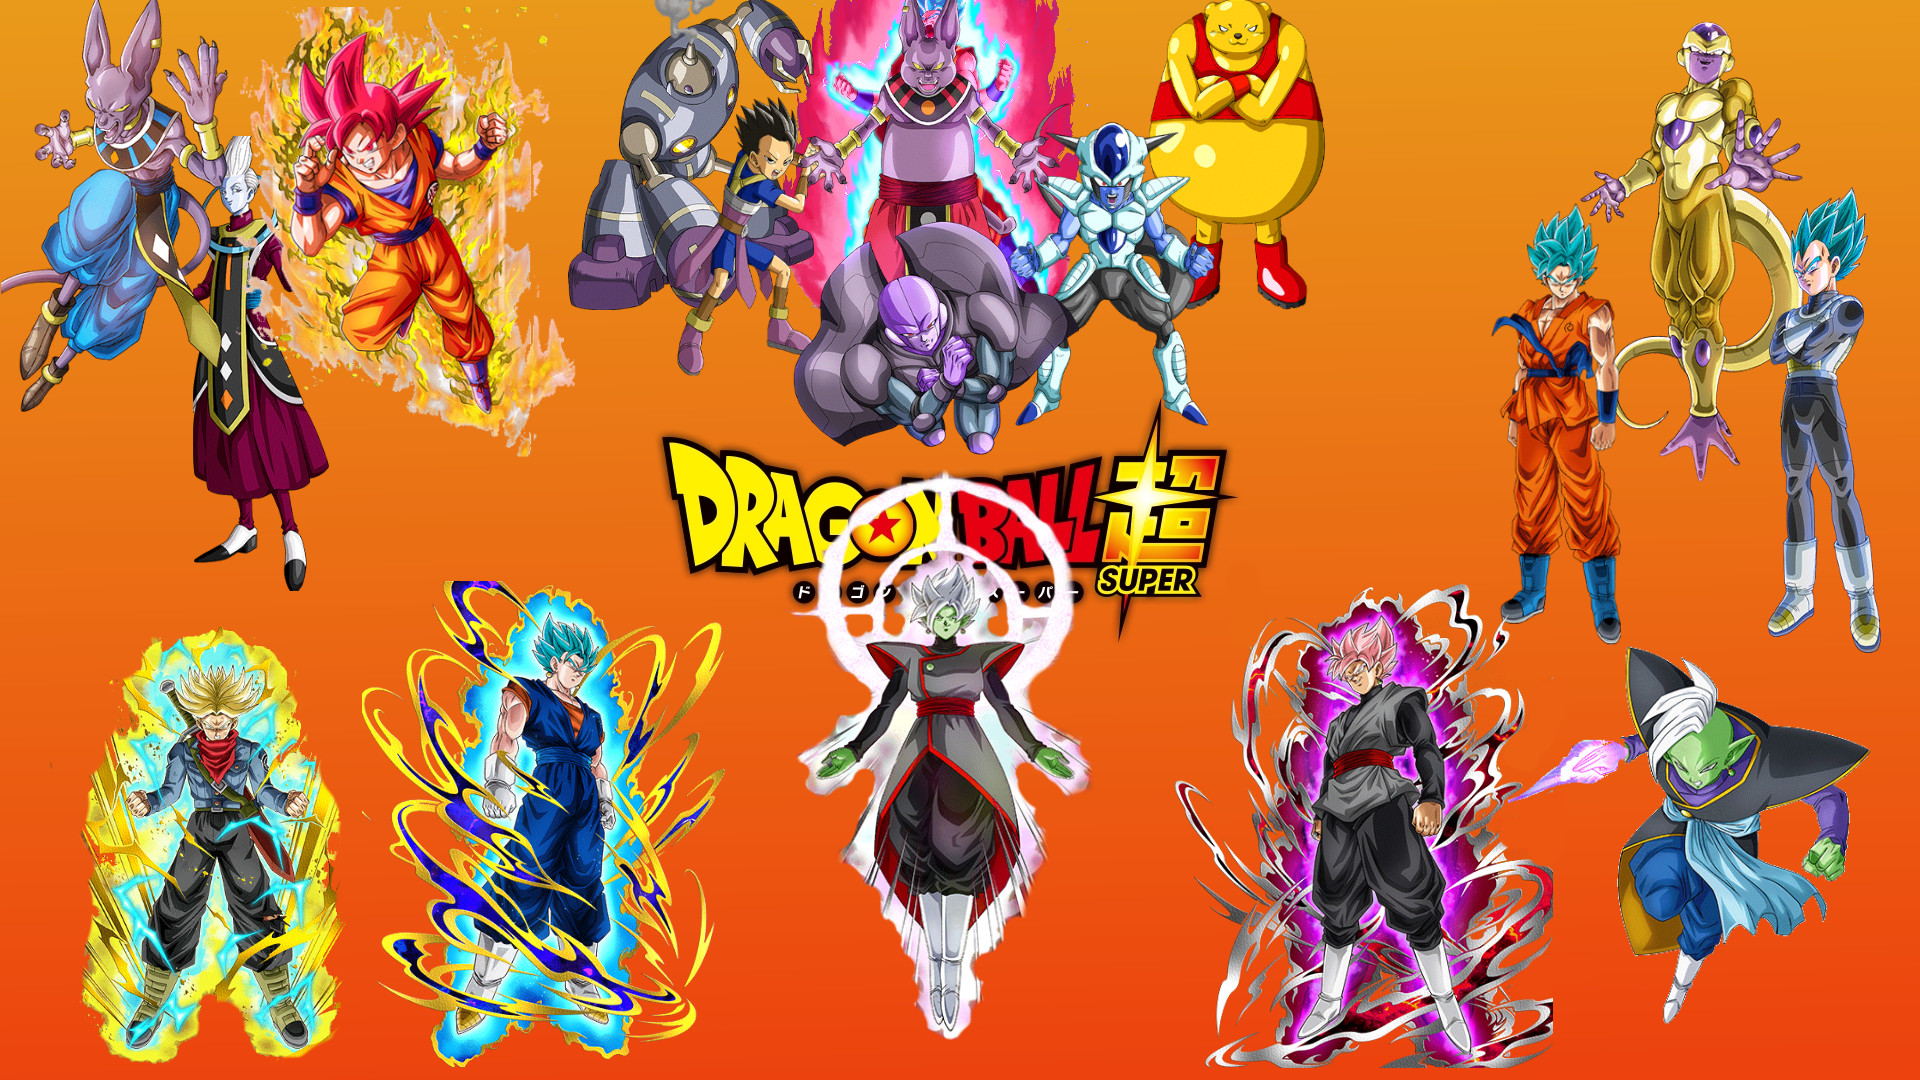 1920x1080 ImageI made a Dragon Ball Super wallpaper using cards from DBZ Dokkan  Battle. I thought some of you might like it ...